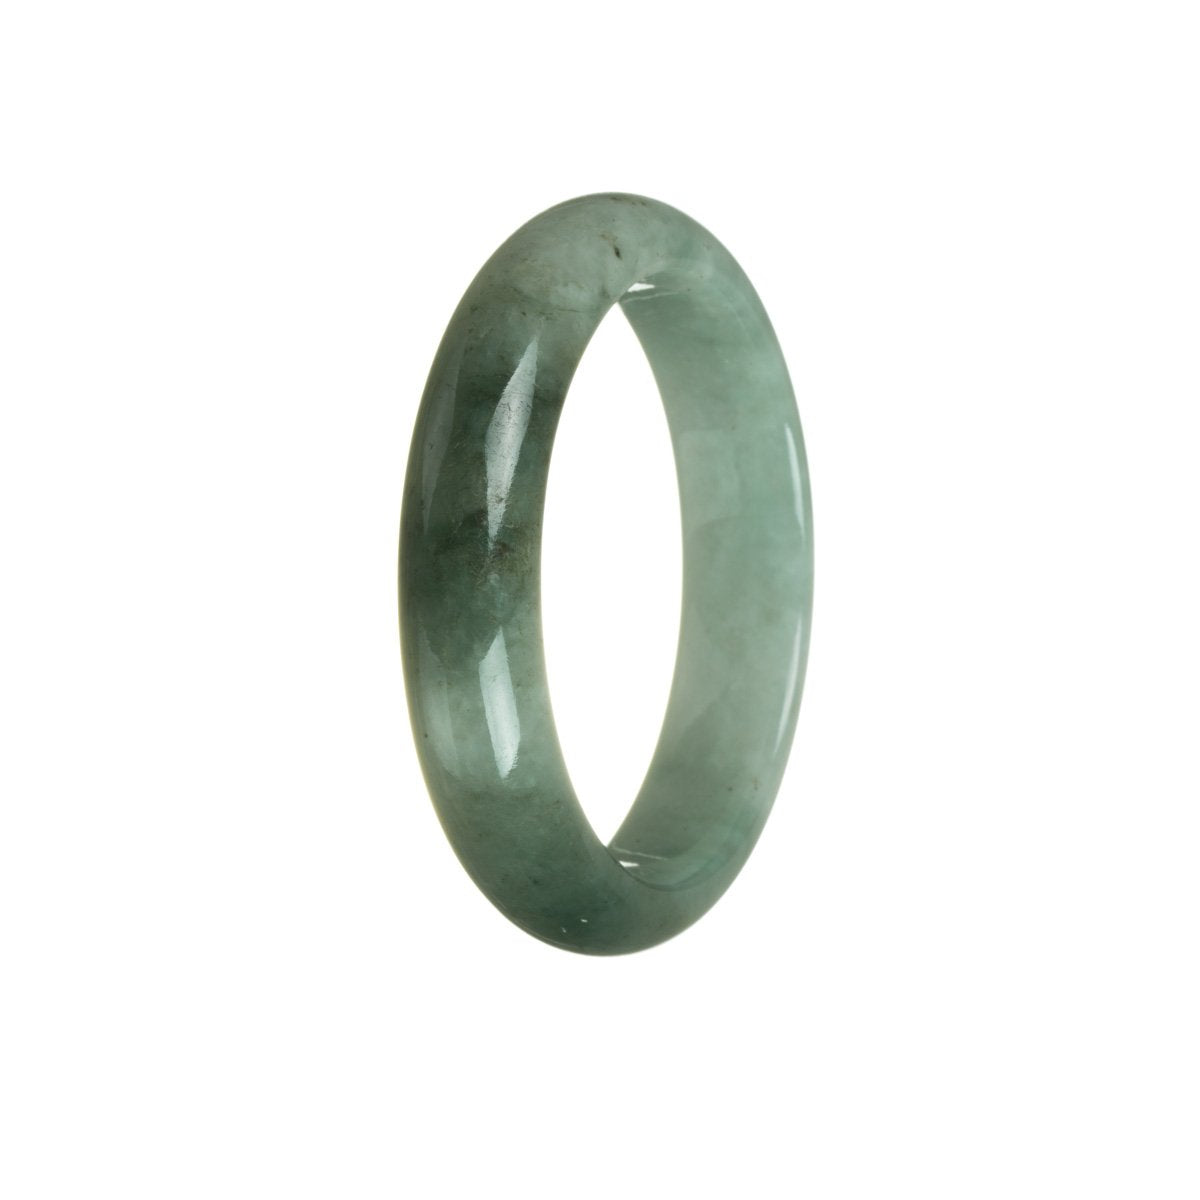 Image of a beautiful green jade bracelet with a half-moon shape. The jade is of high quality, featuring a vibrant green color with subtle pale green undertones. This traditional bracelet is made with authentic Grade A jade and measures 55mm in diameter. A perfect accessory to enhance any outfit.